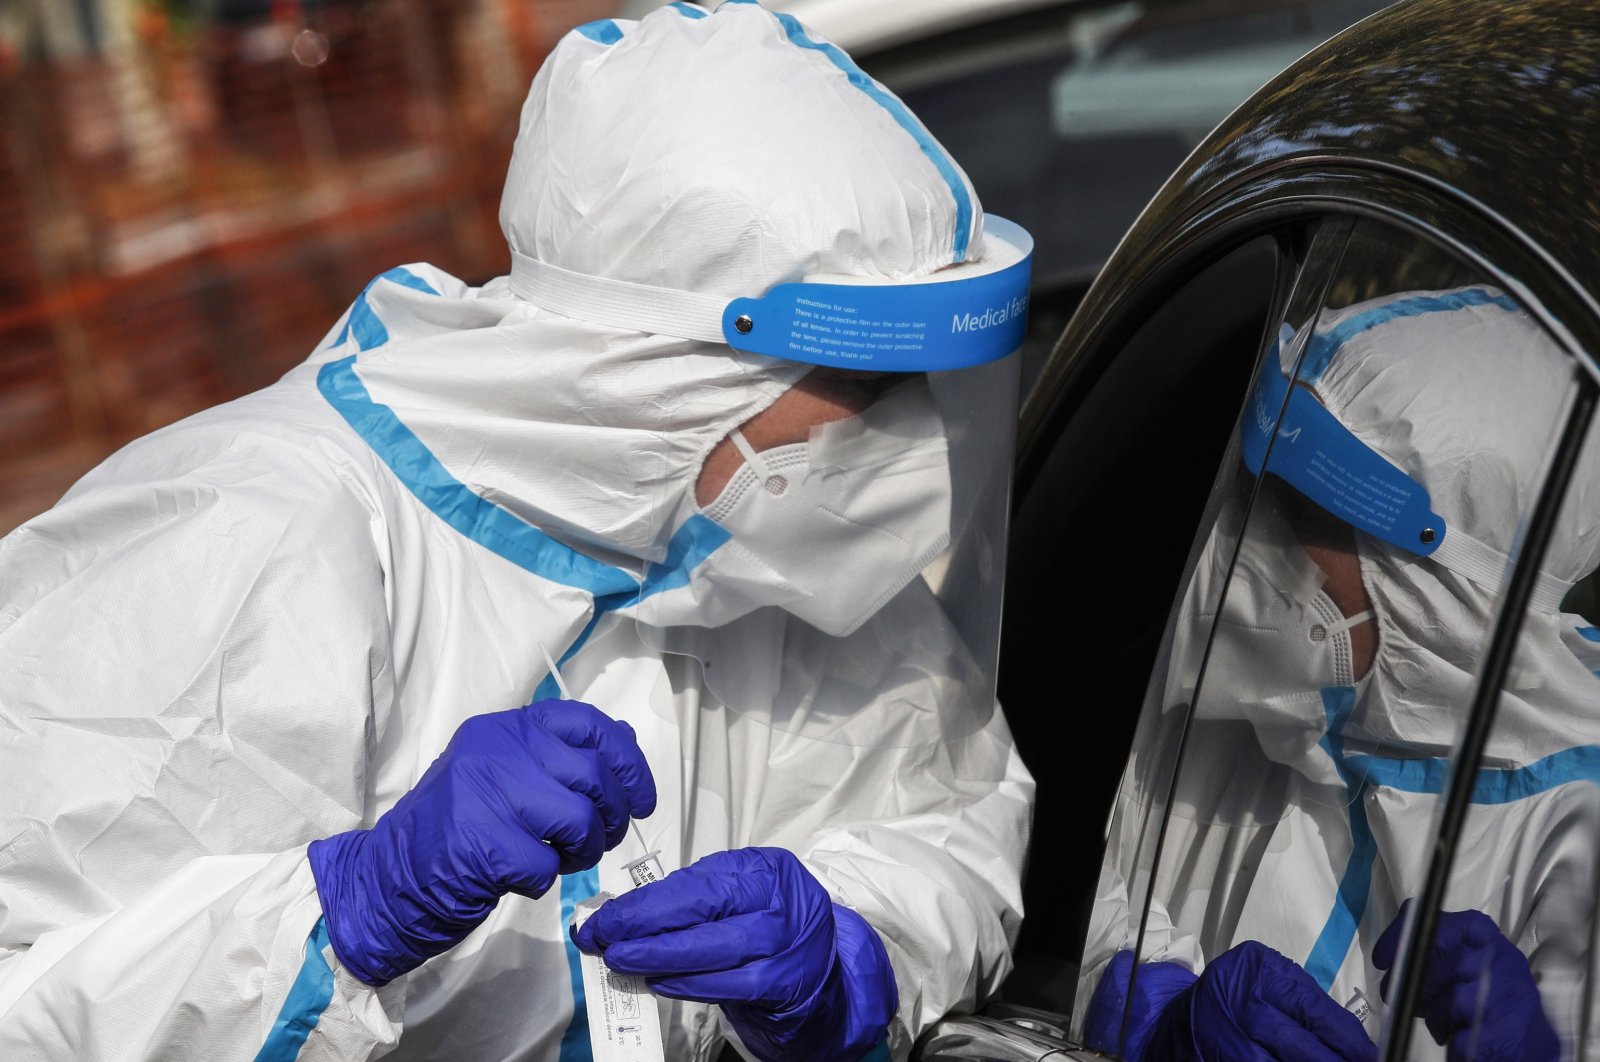 Health workers, wearing overalls and protective masks, perform swab tests in a parking lot, in Tor di Quinto avenue, Rome, Italy, Oct. 22, 2020. (EPA Photo)